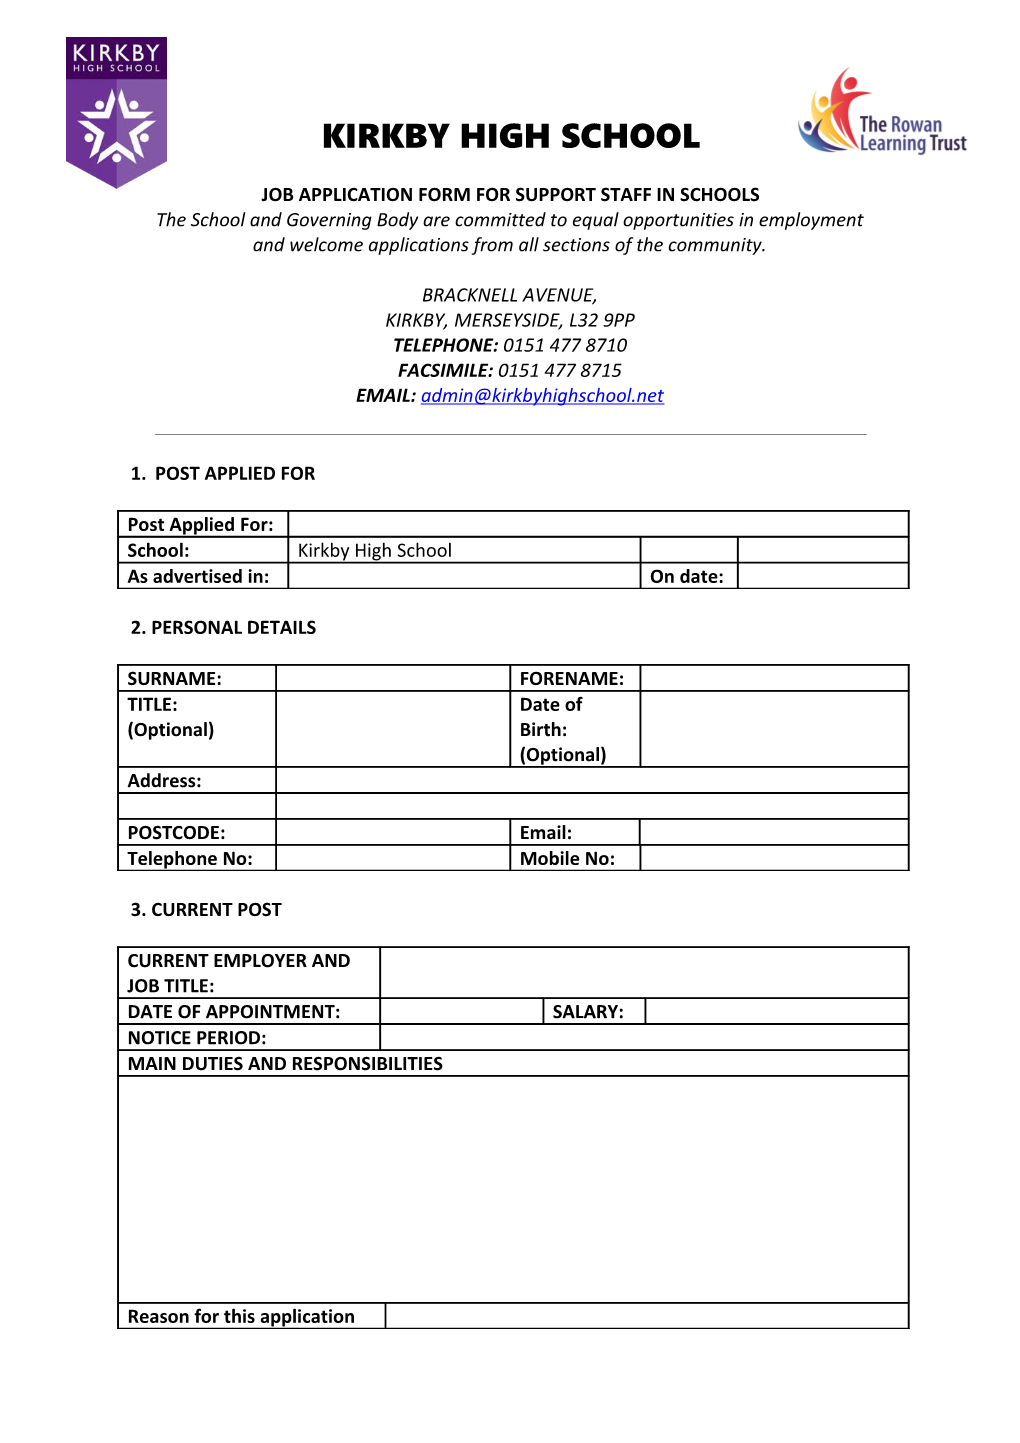 Job Application Form for Support Staff in Schools